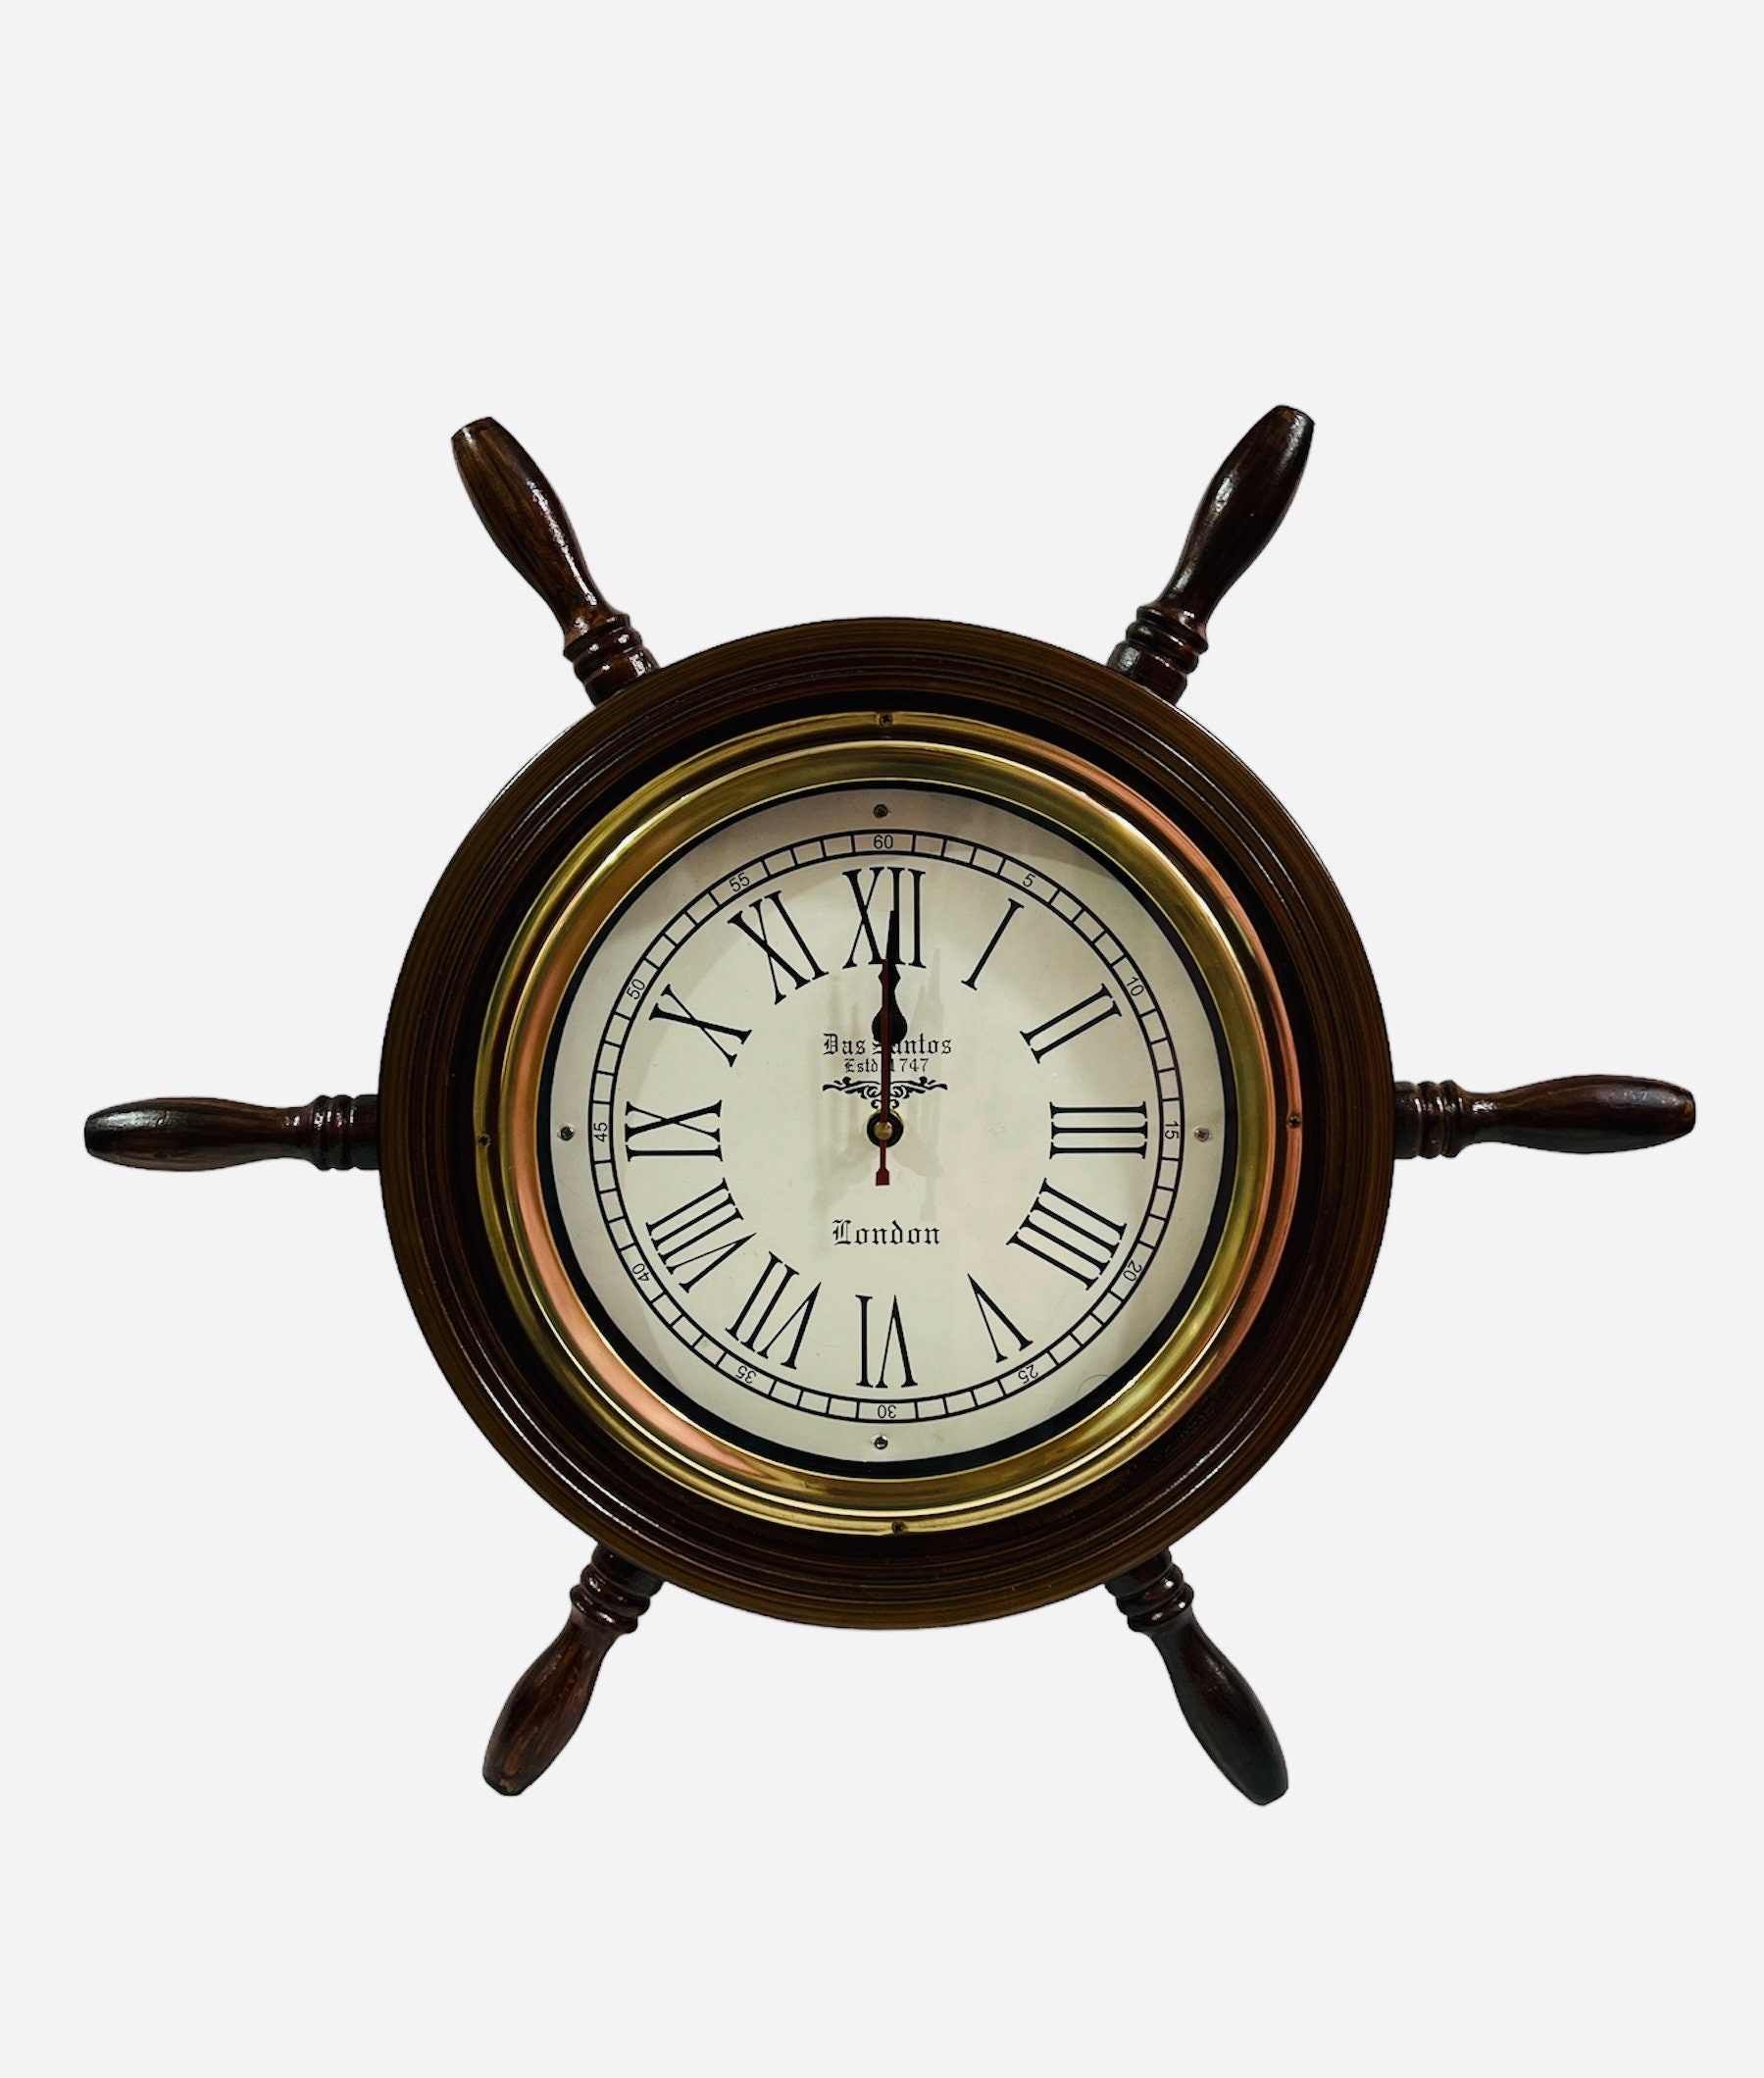 Porthole Ship Wheel Wall Clock Working Condition 18 Inches 